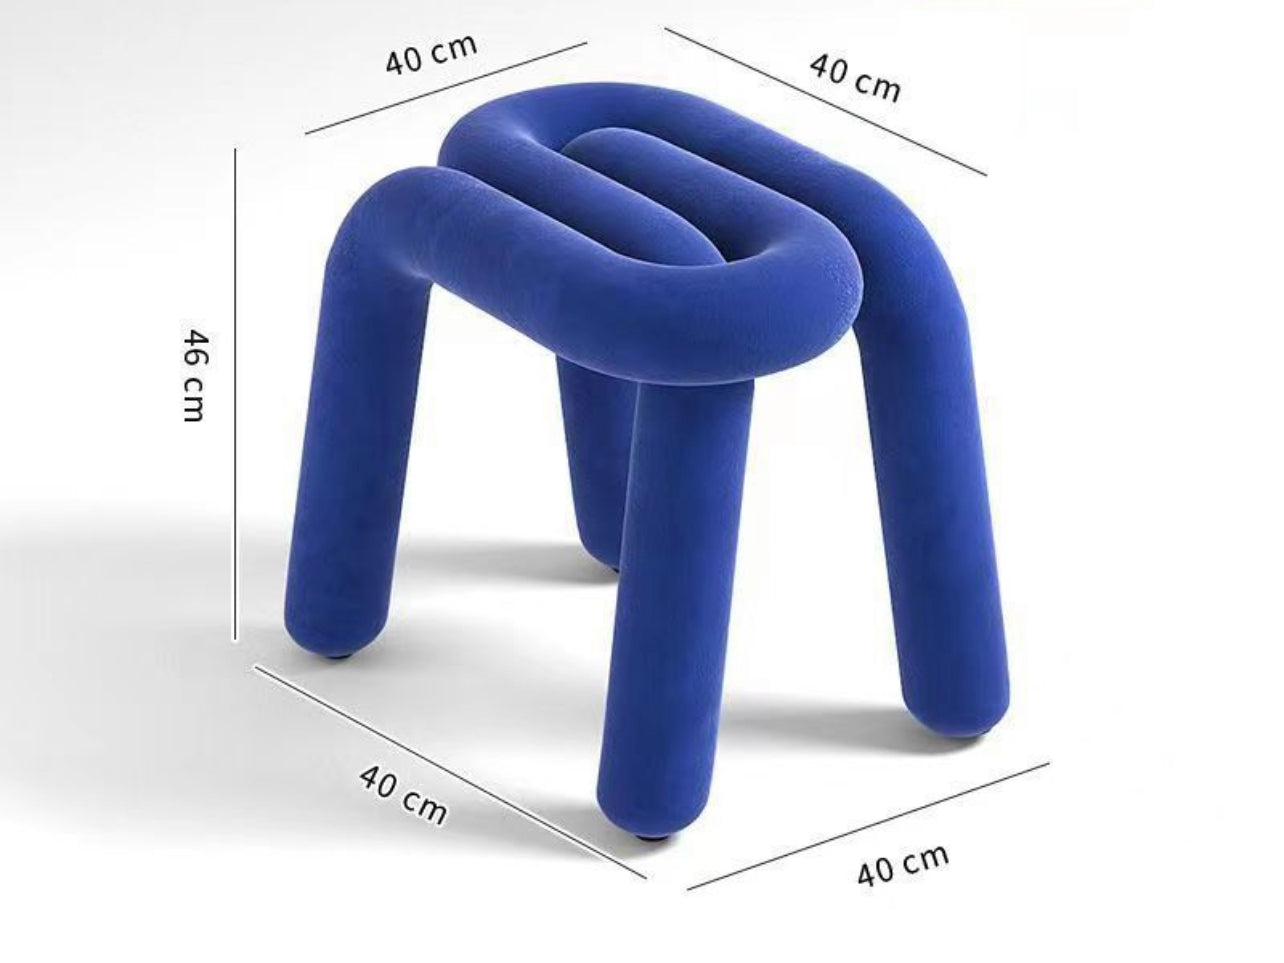 The Red Contemporary Stool